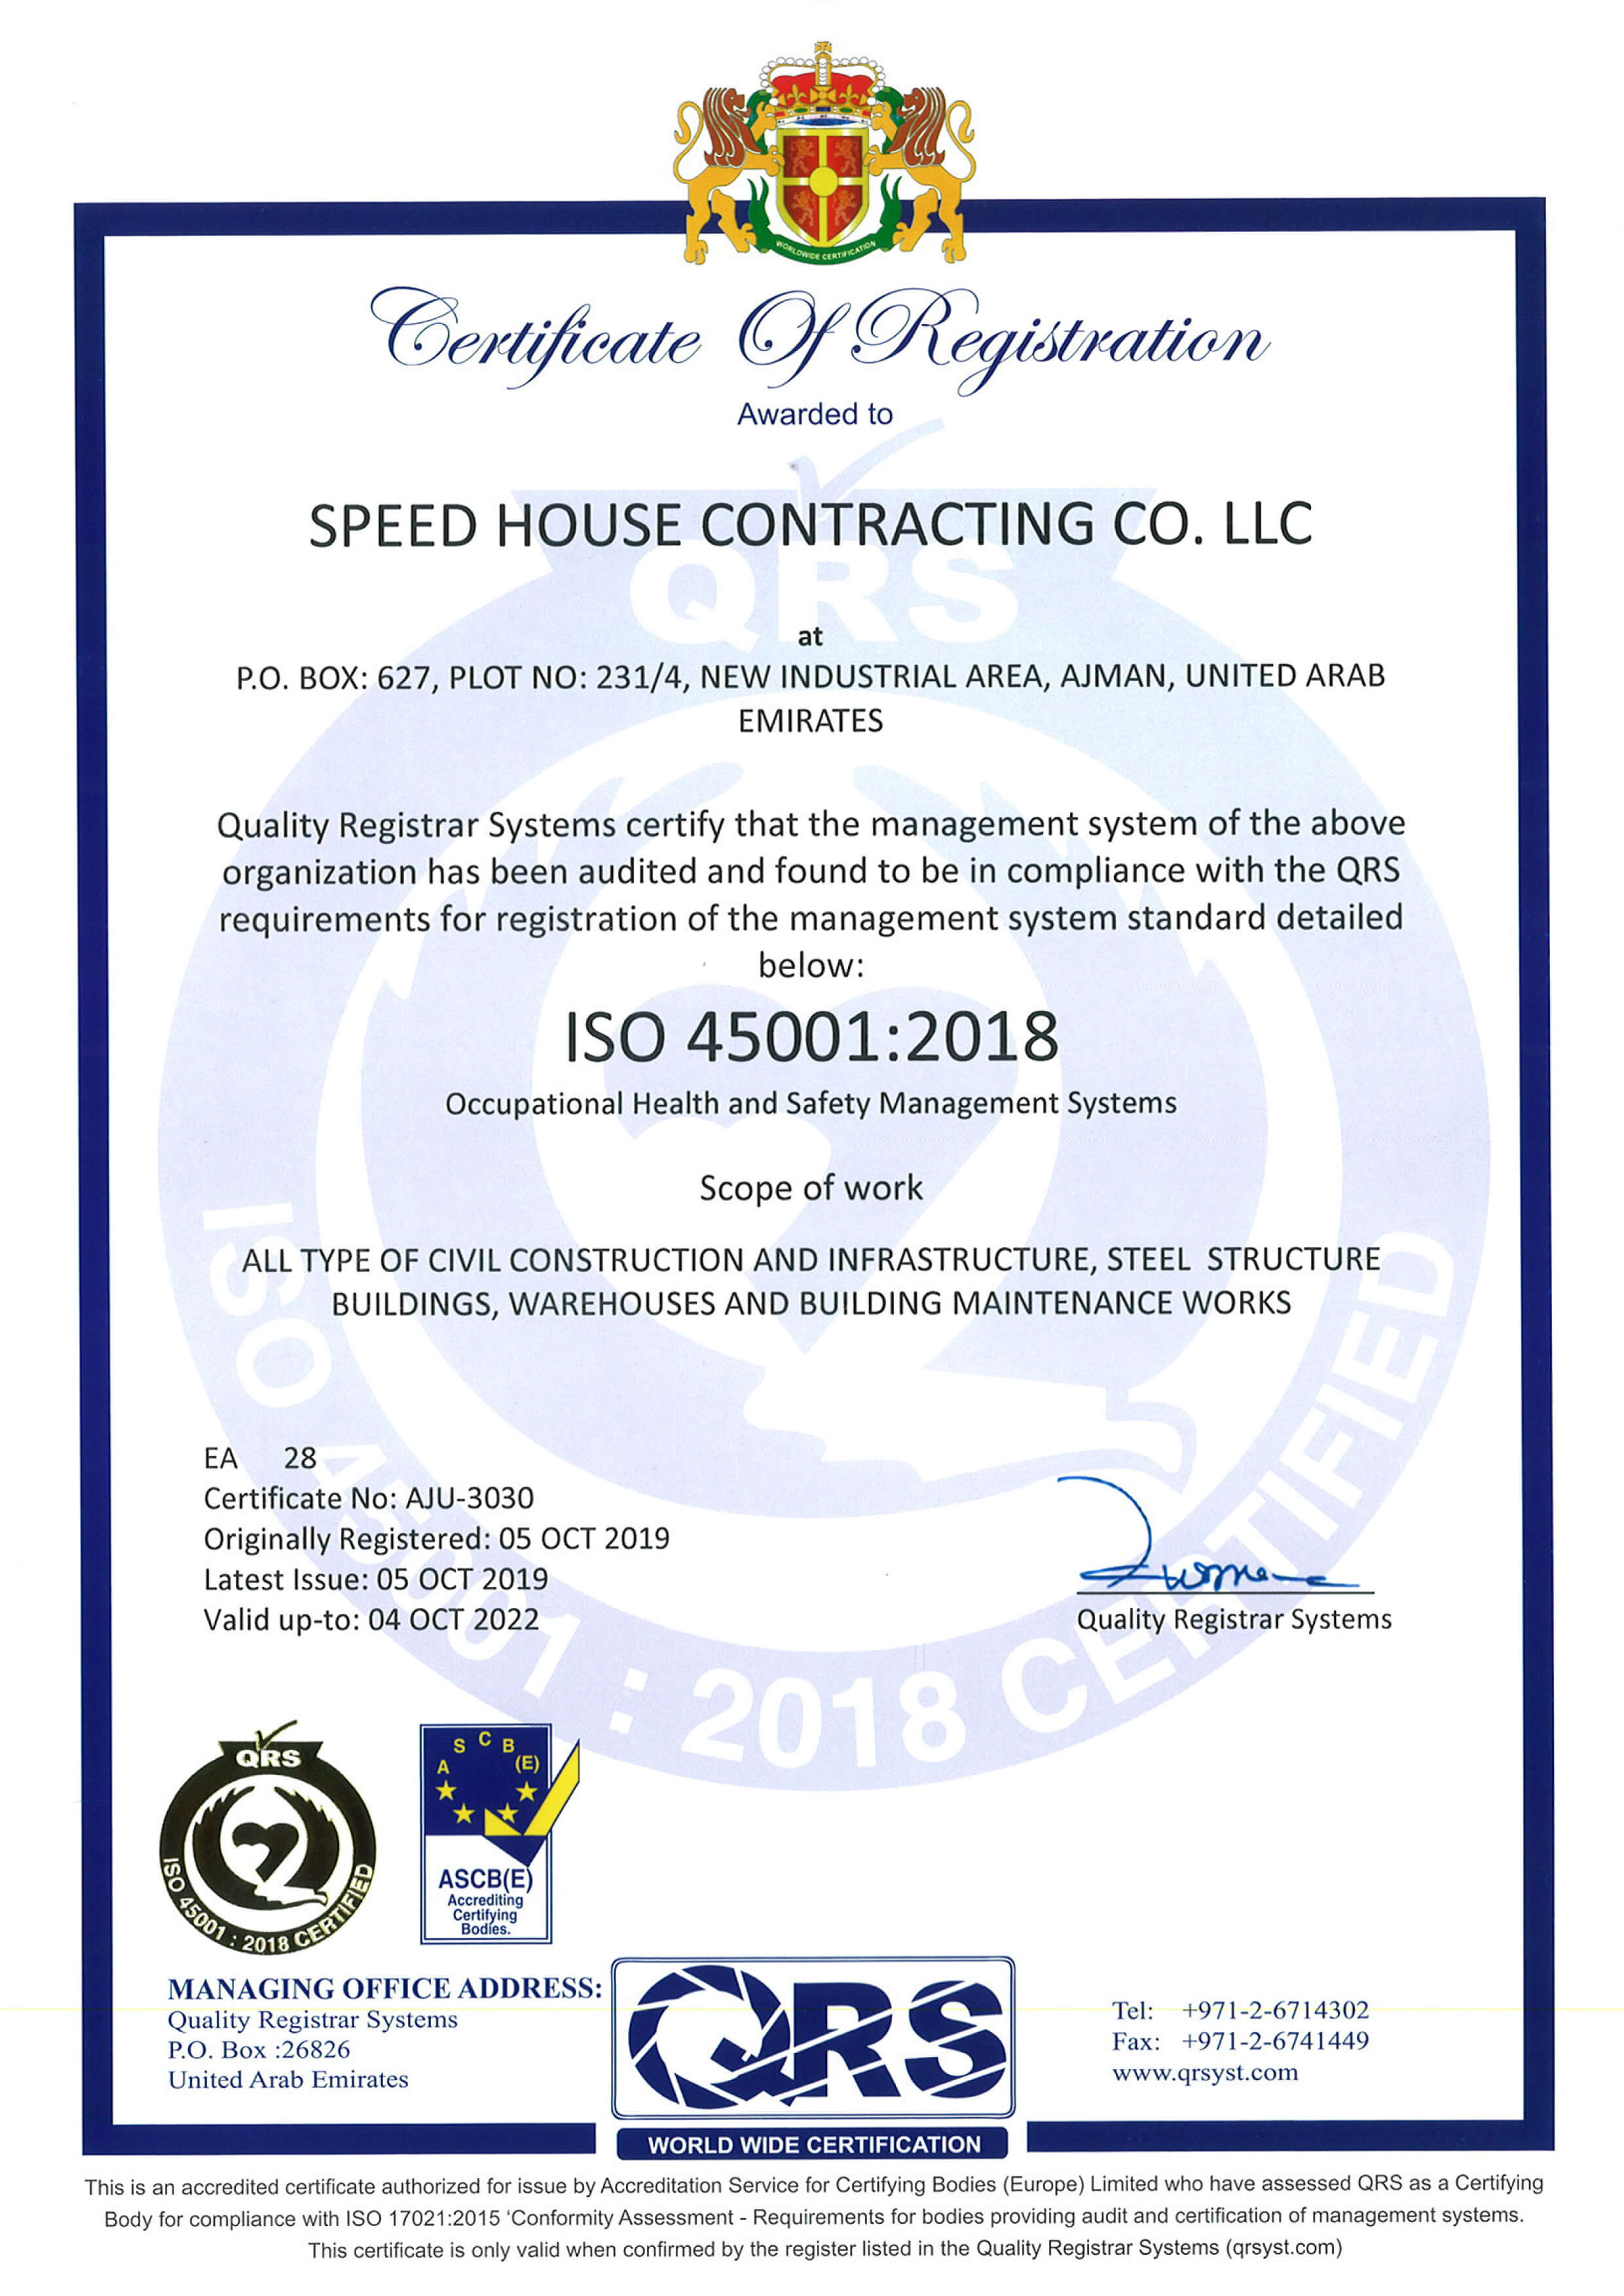 Speed House Group Contracting ISO 45001 Certificate